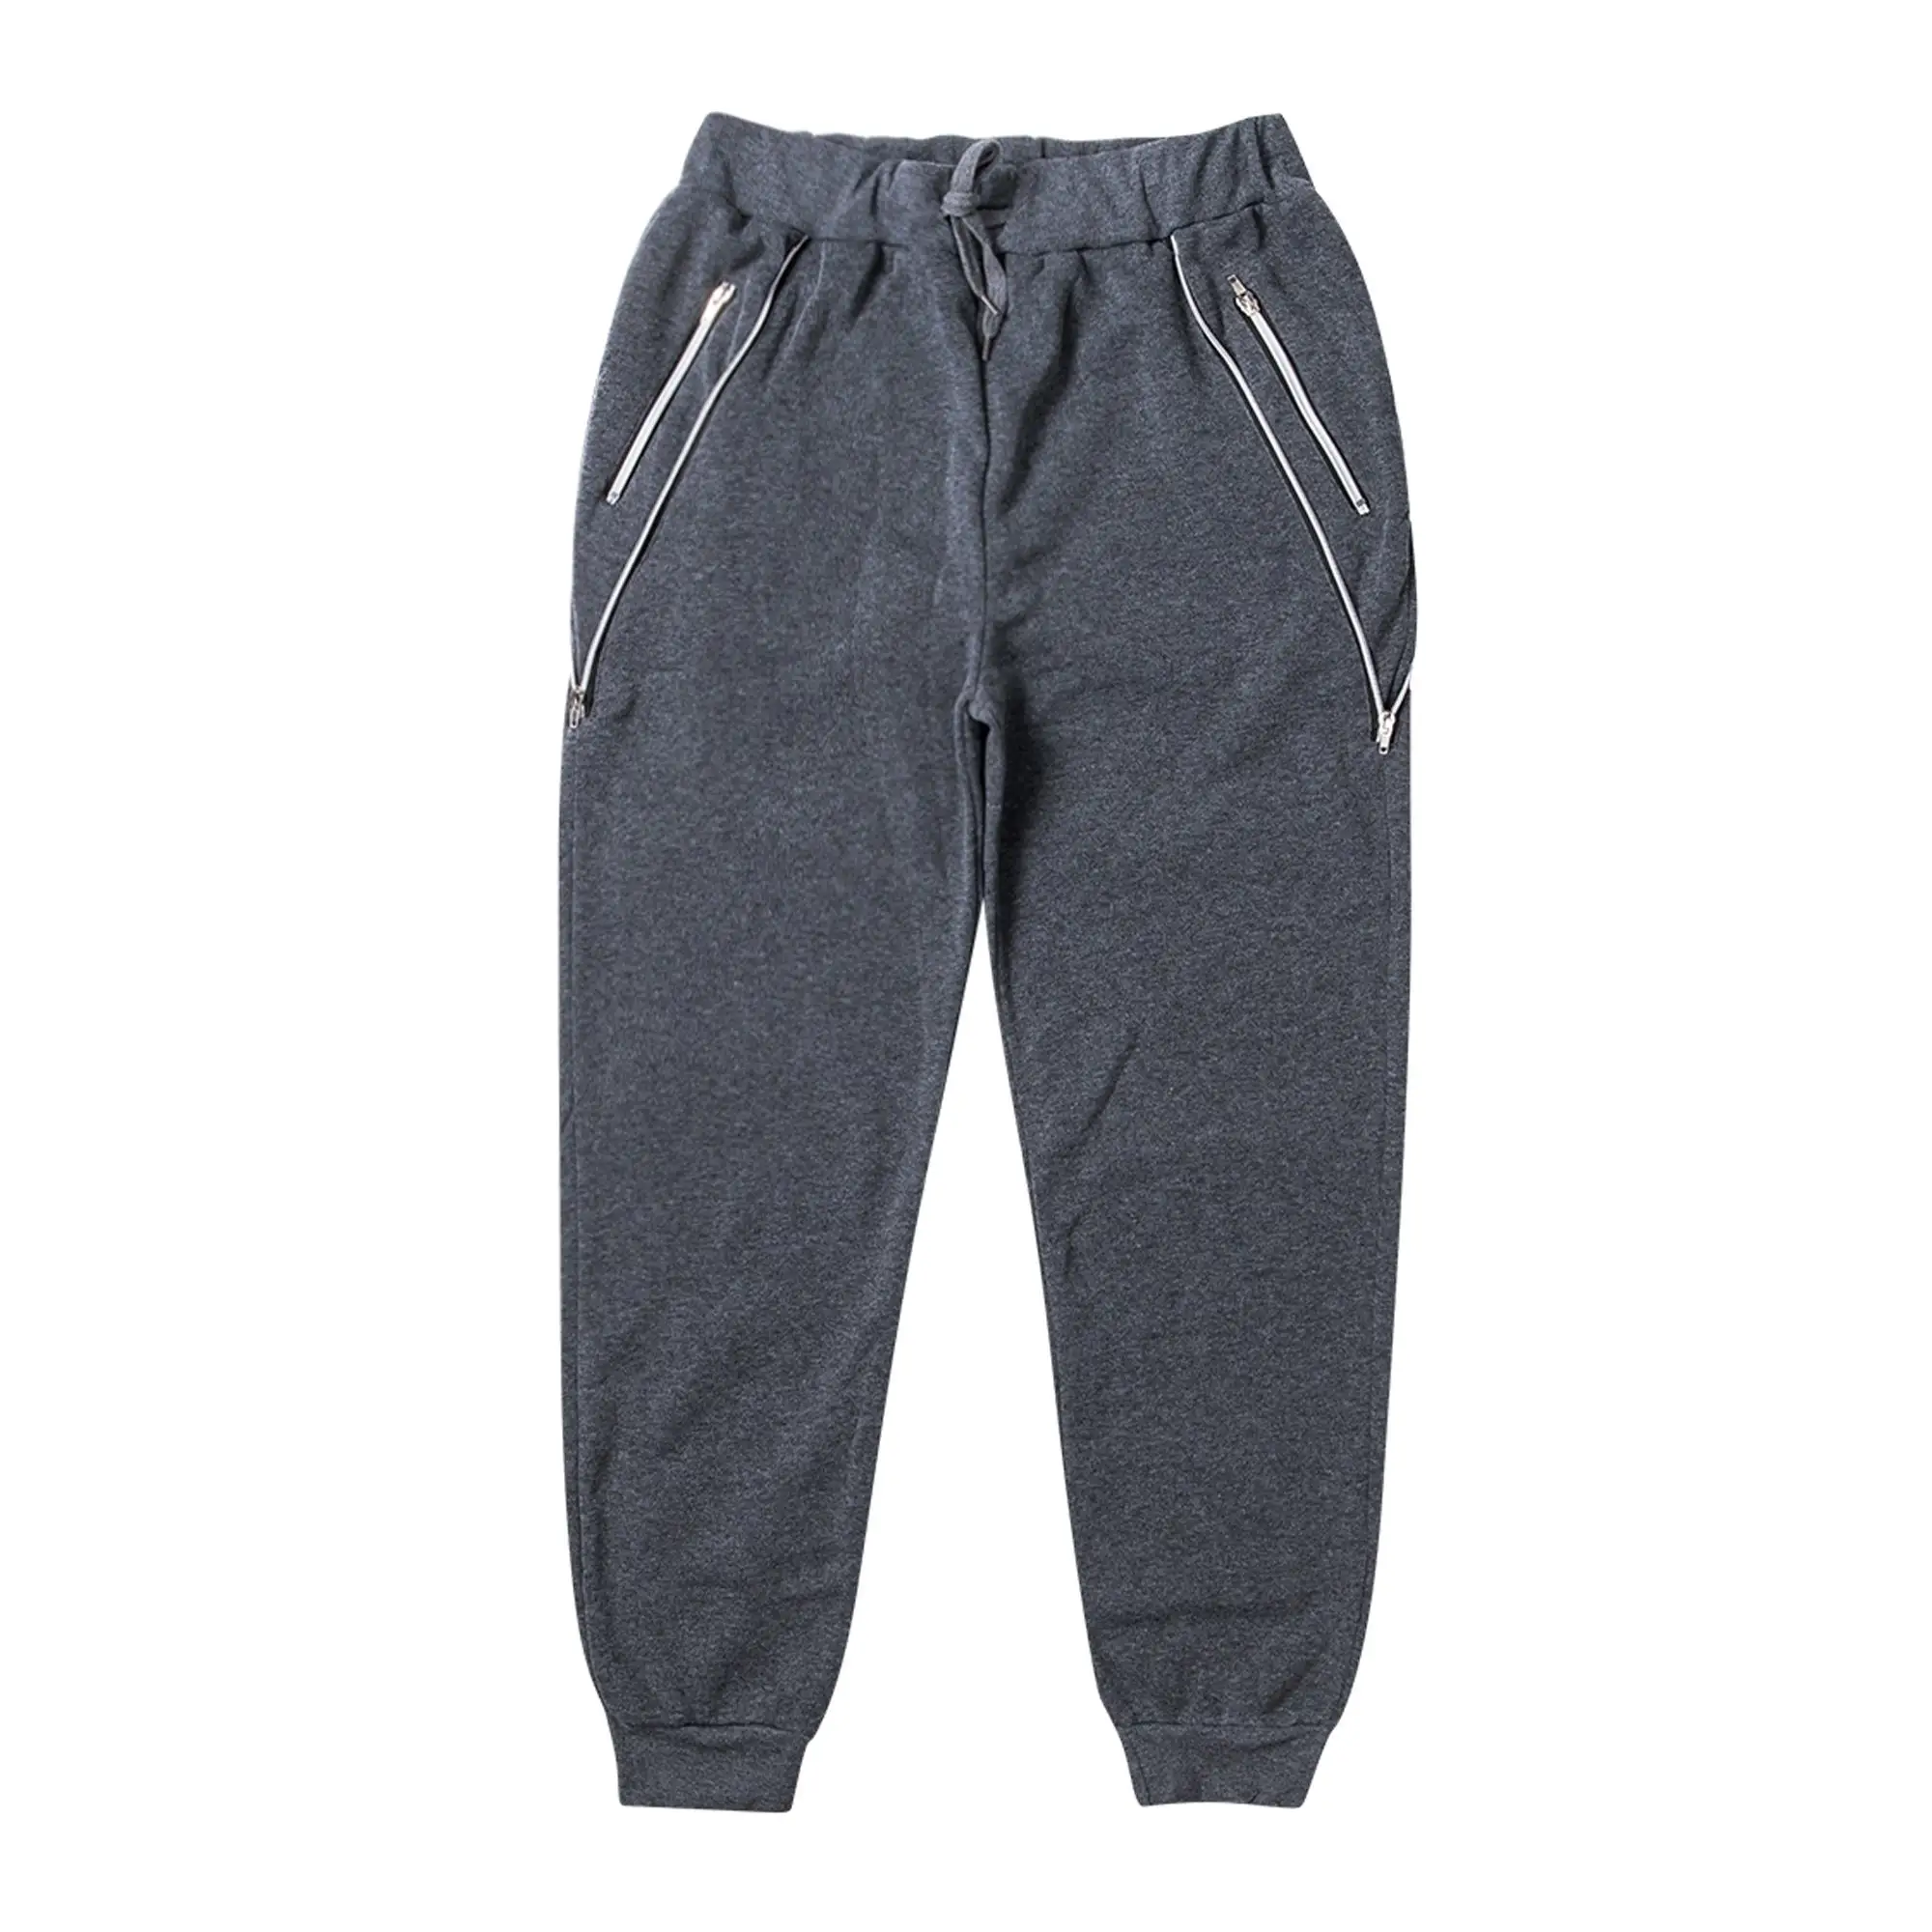 Men's Jogger Sweatpants With Two Zipper Pockets Tracksuit Bottom For Gym Running Sports Track Pants